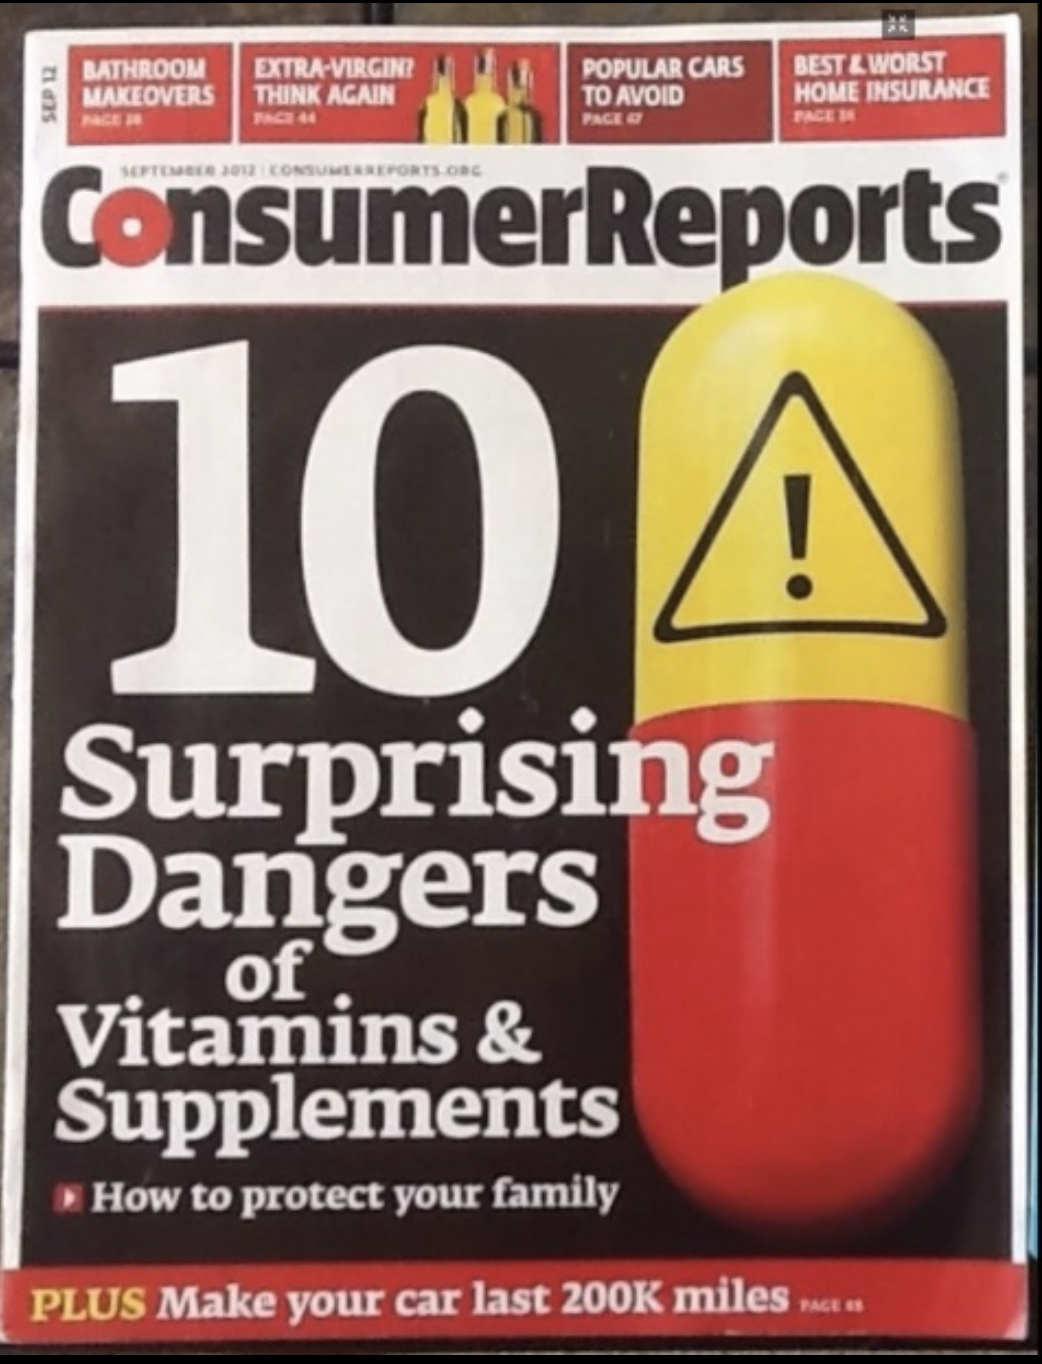 Consumer Reports - 10 Surprising dangers of Vitamins and Supplements